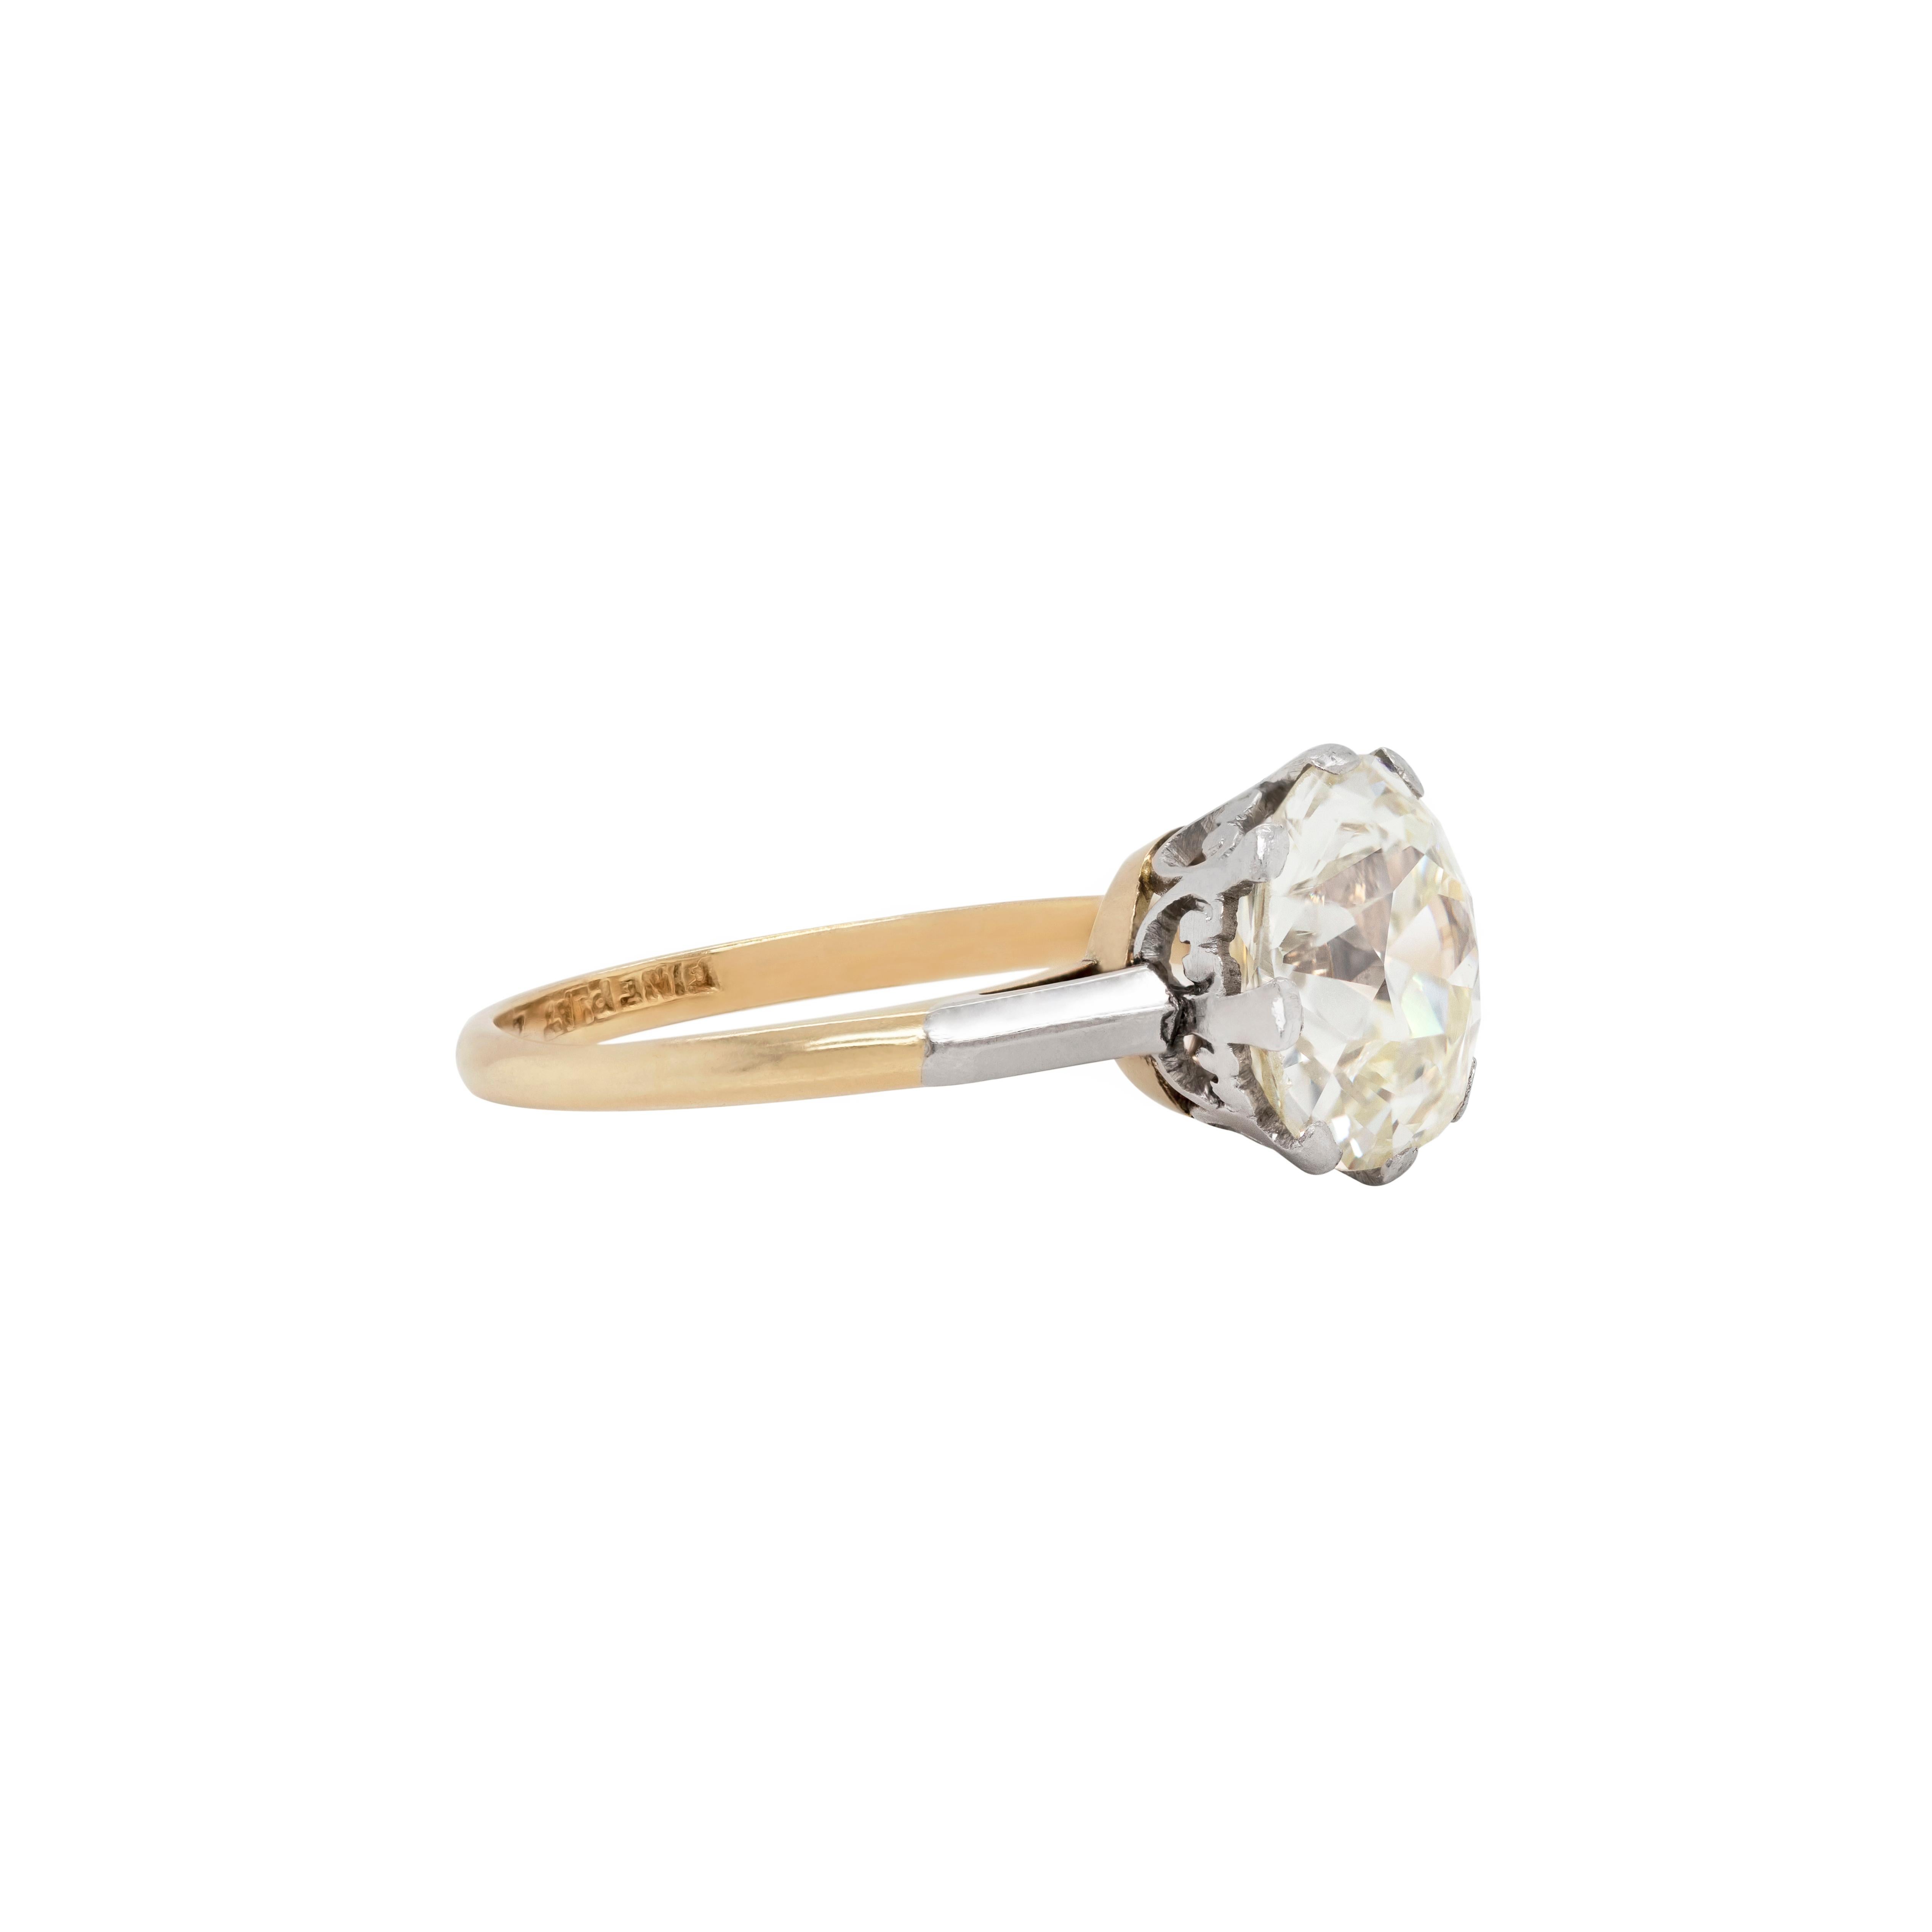 Beautiful antique engagement ring set with a cushion shaped old cut diamond weighing 3.42 carats mounted in an open back, intricate crown eight claw platinum collet and 18 carat gold shank. The ring is an original Edwardian piece marked 18CT and